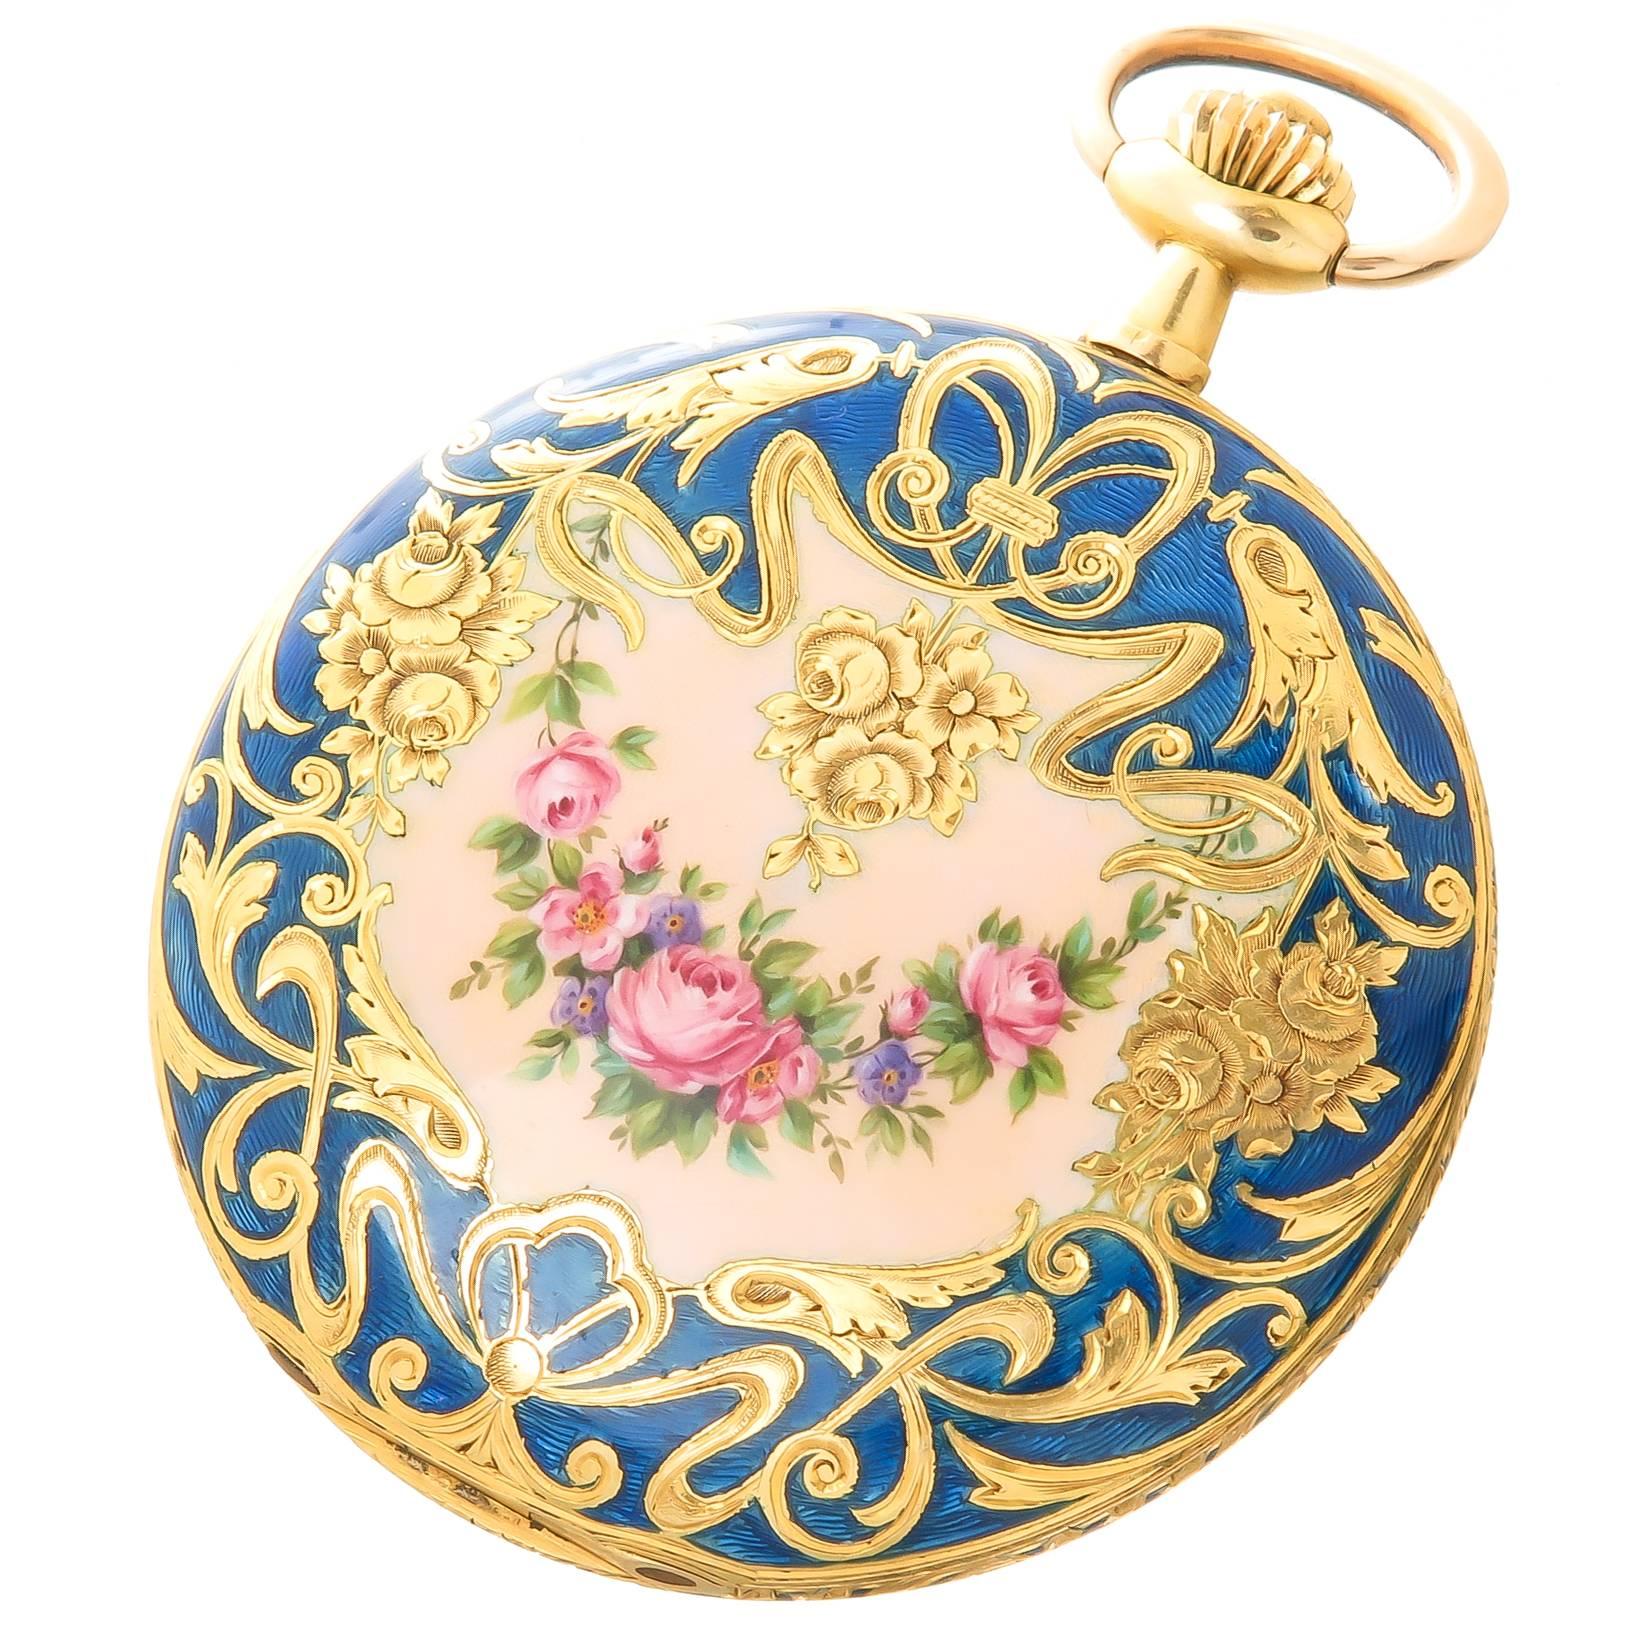 Didisheim yellow Gold Guilloche Enamel Large Covered Case Pocket Watch